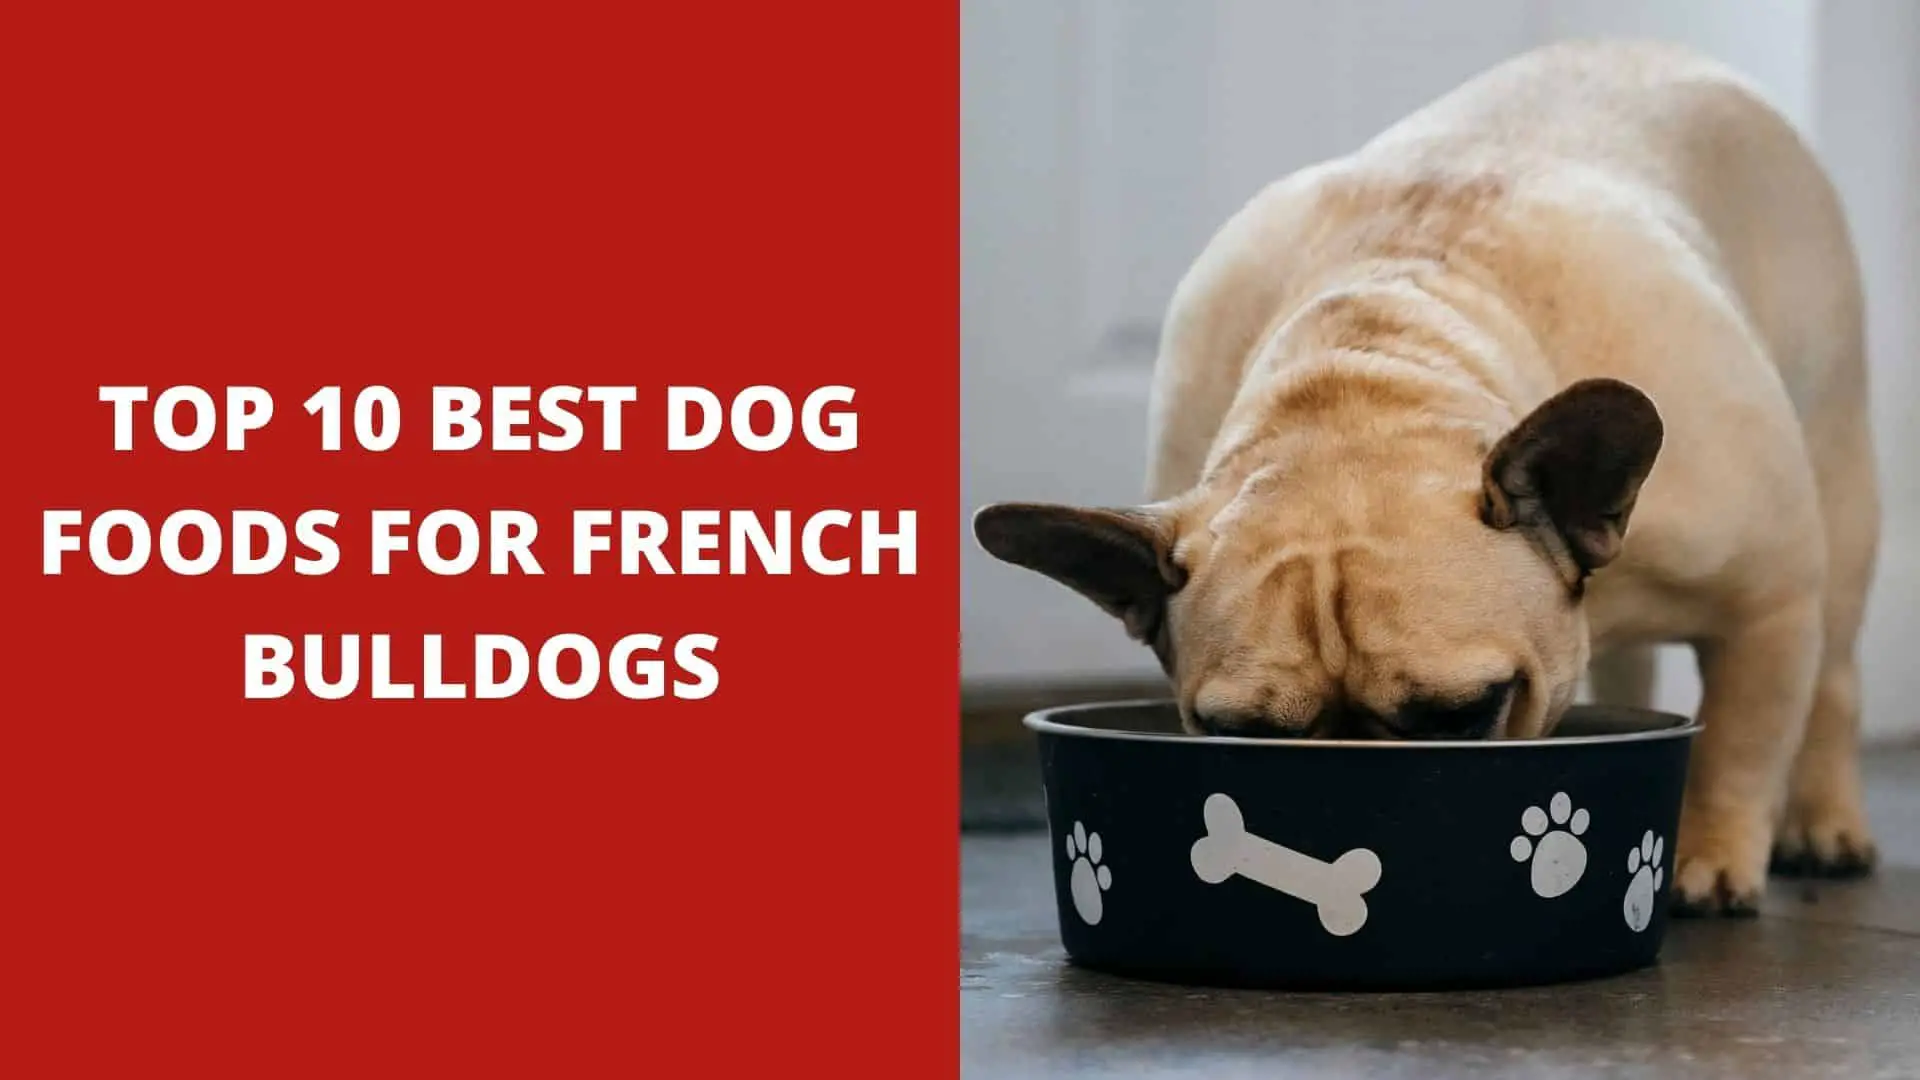 Top 10 Best Dog Foods For French Bulldogs (2022 Reviews)